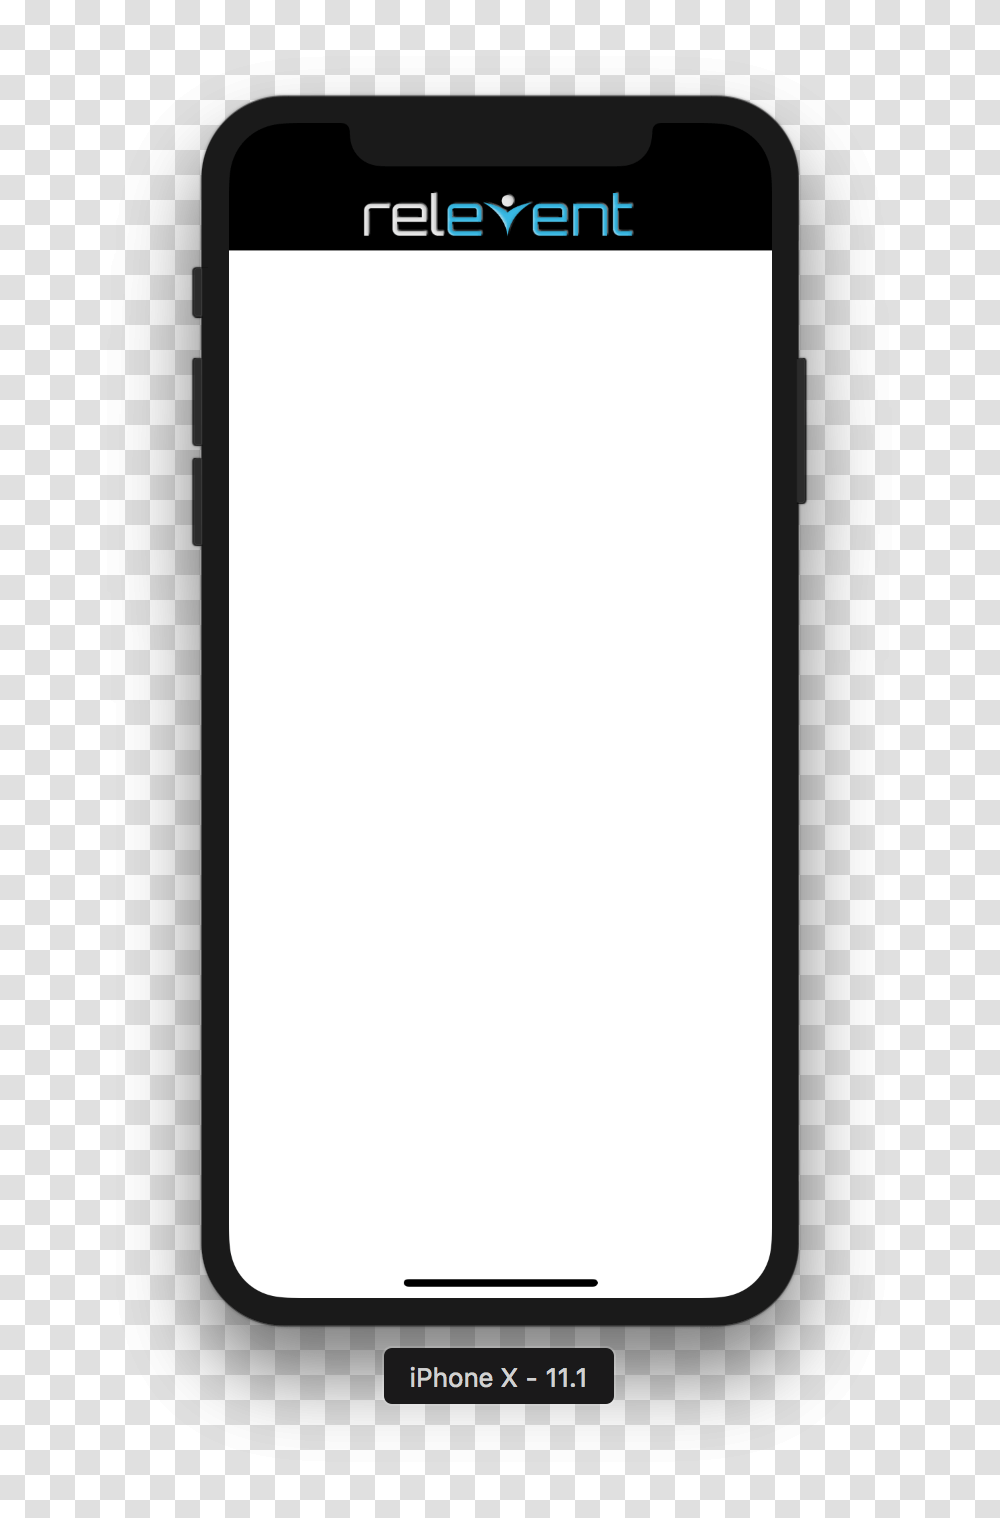 Timob Ios Bar Image Is Not Showing Properly In Iphone X, Electronics, Mobile Phone, Cell Phone Transparent Png